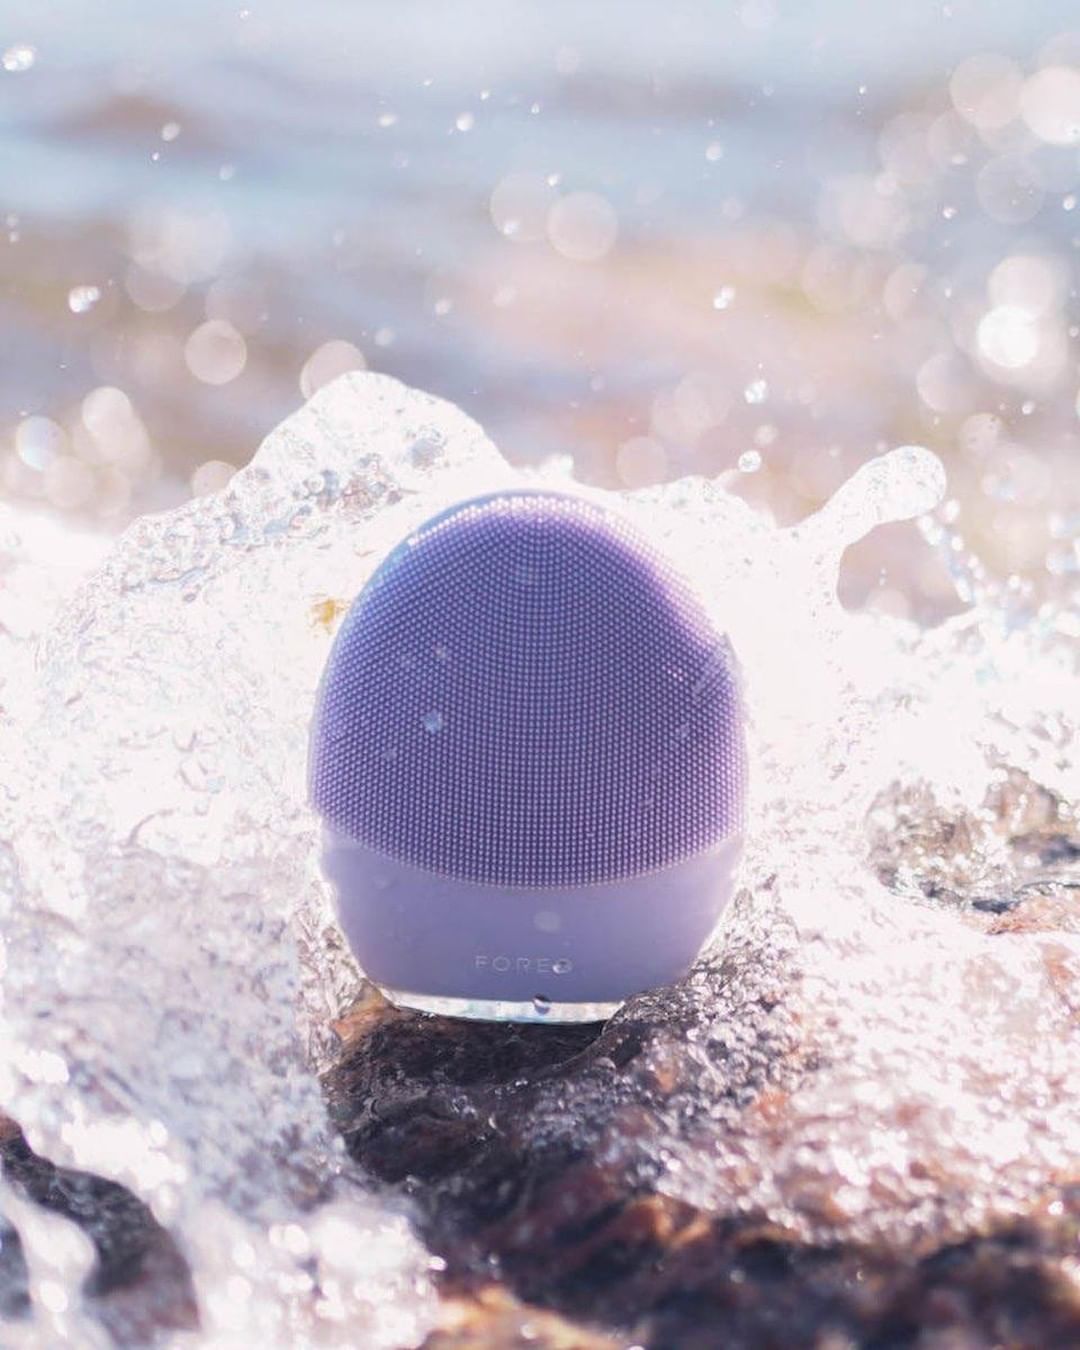 FOREO - How's your skin handling summer ☀️🌊!?
Sea salt, sun, and fun can play a toll on your skin, so don't forget to properly take care of it. The key to avoid breakouts during the summer is to prope...